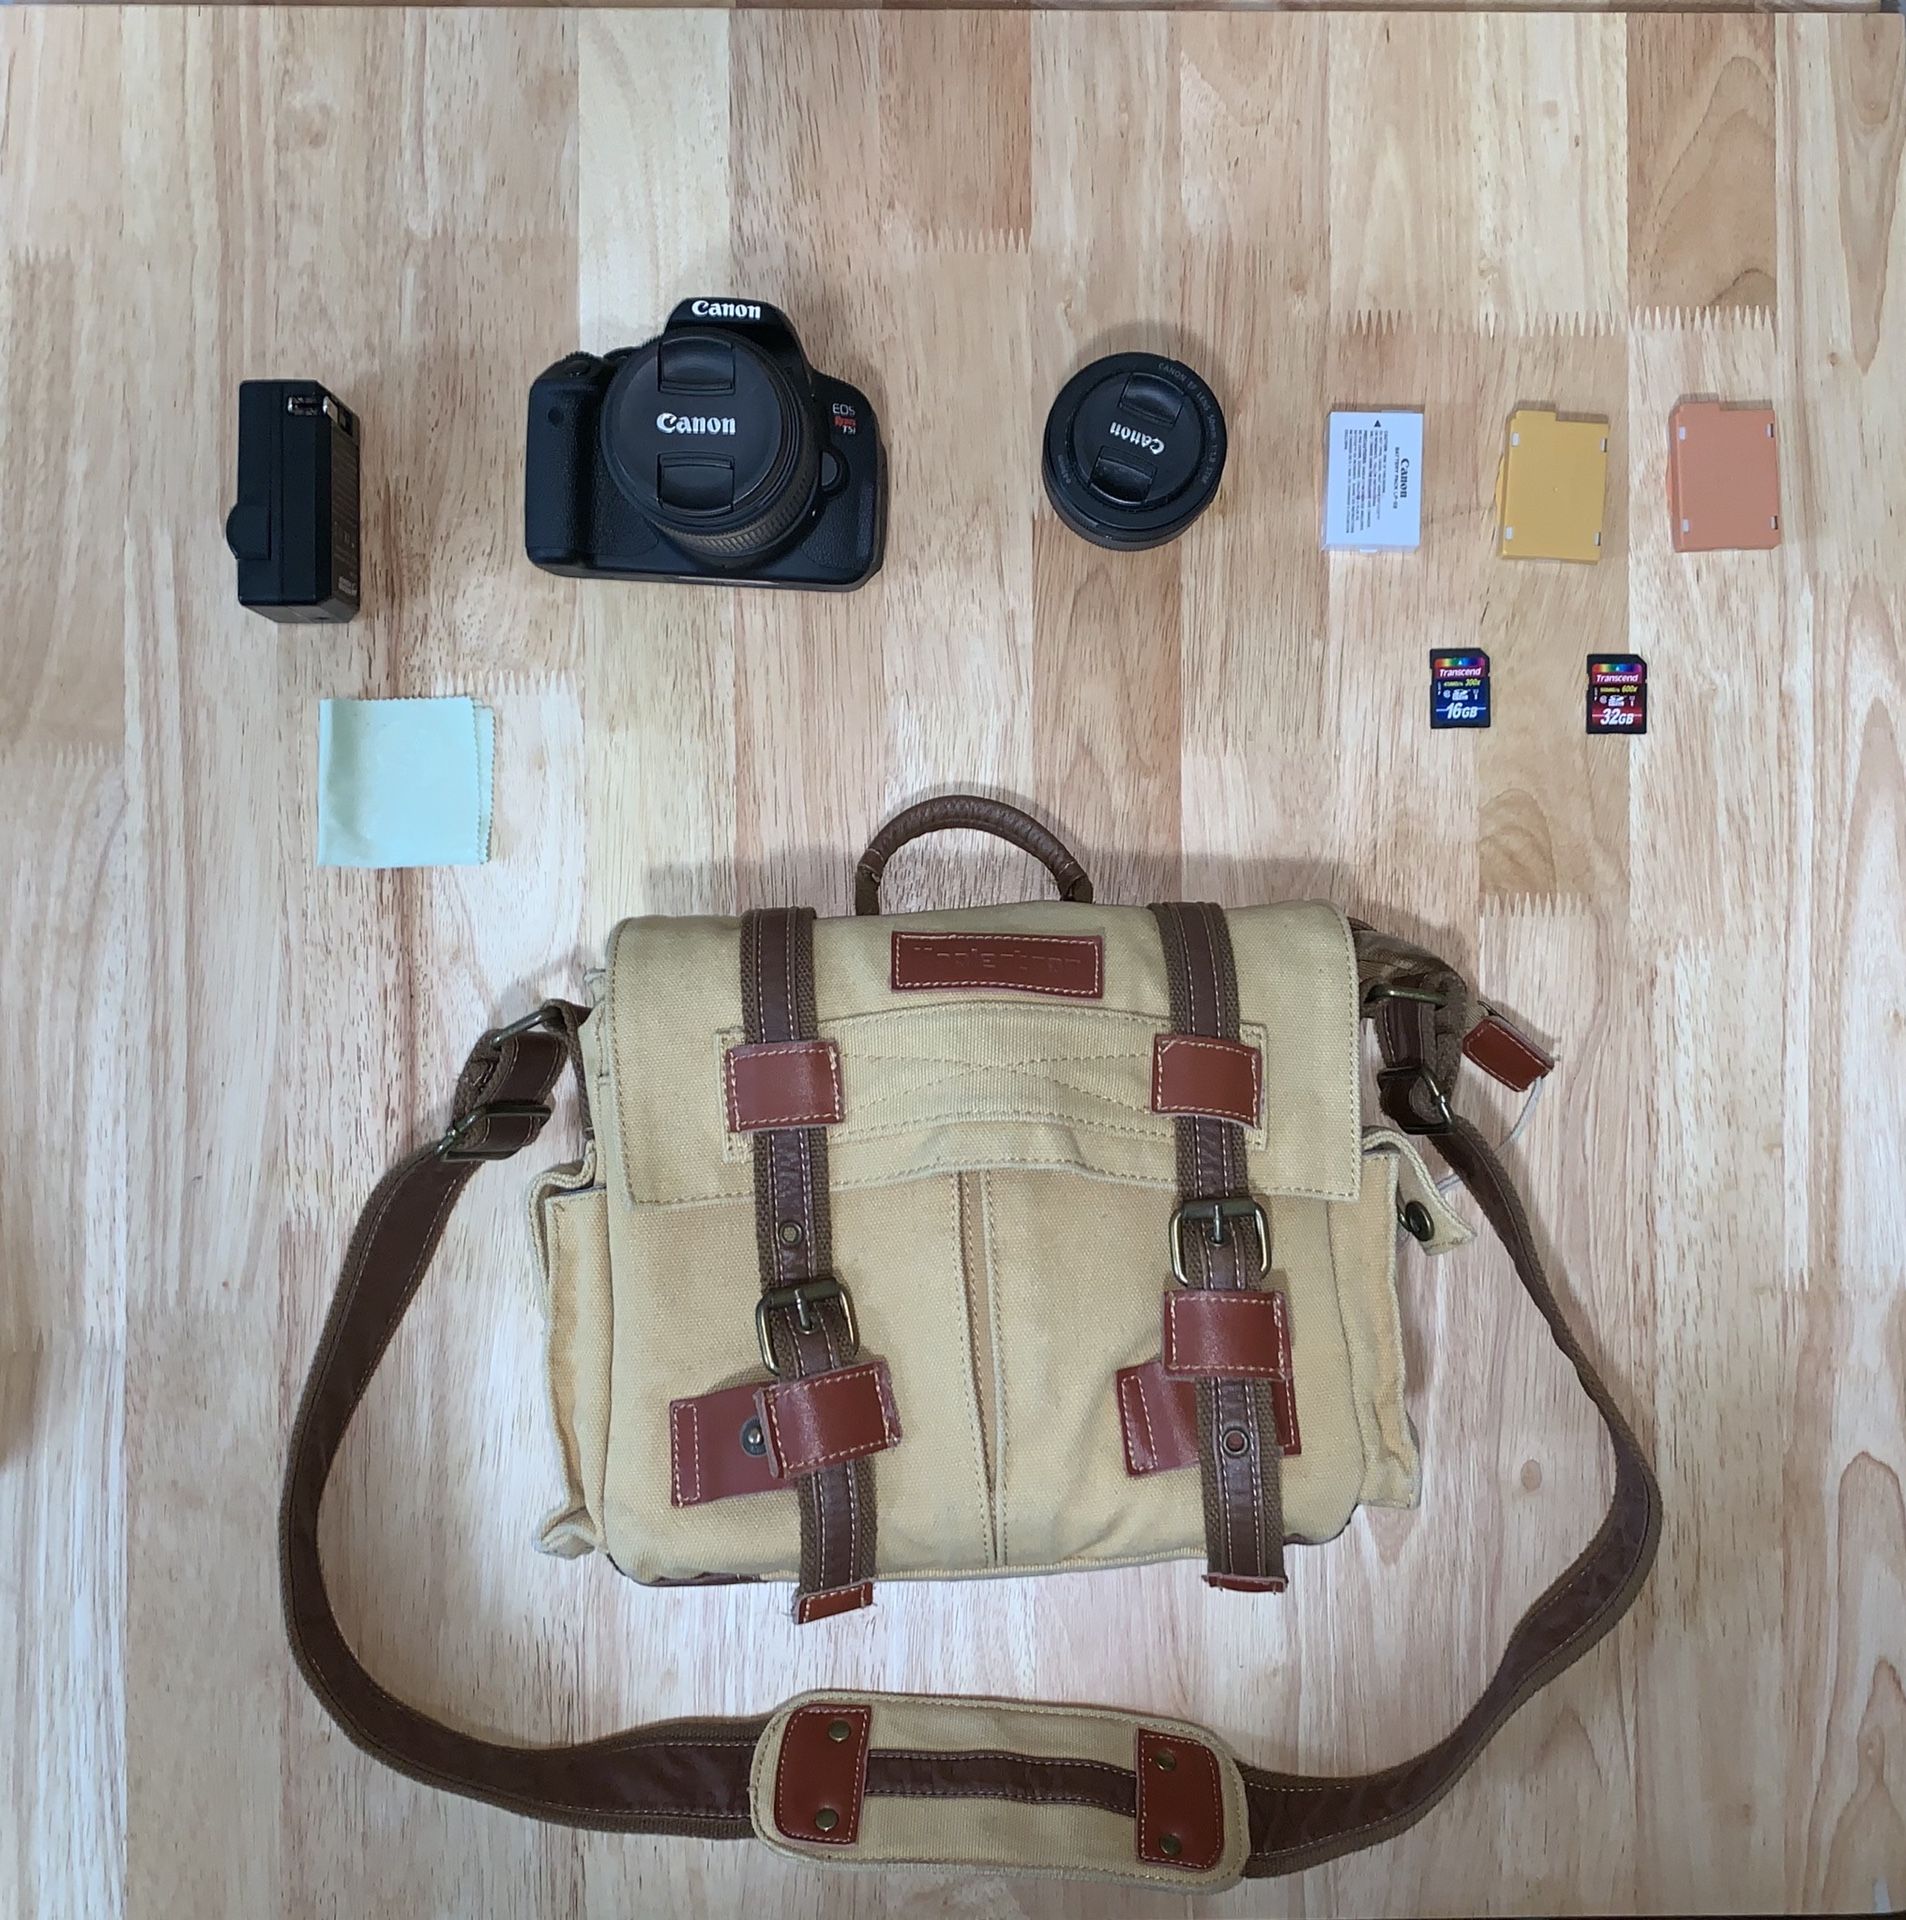 Canon Rebel T5i w/ 2 lenses, 3 batteries, 2 SD cards, and a Camera Bag